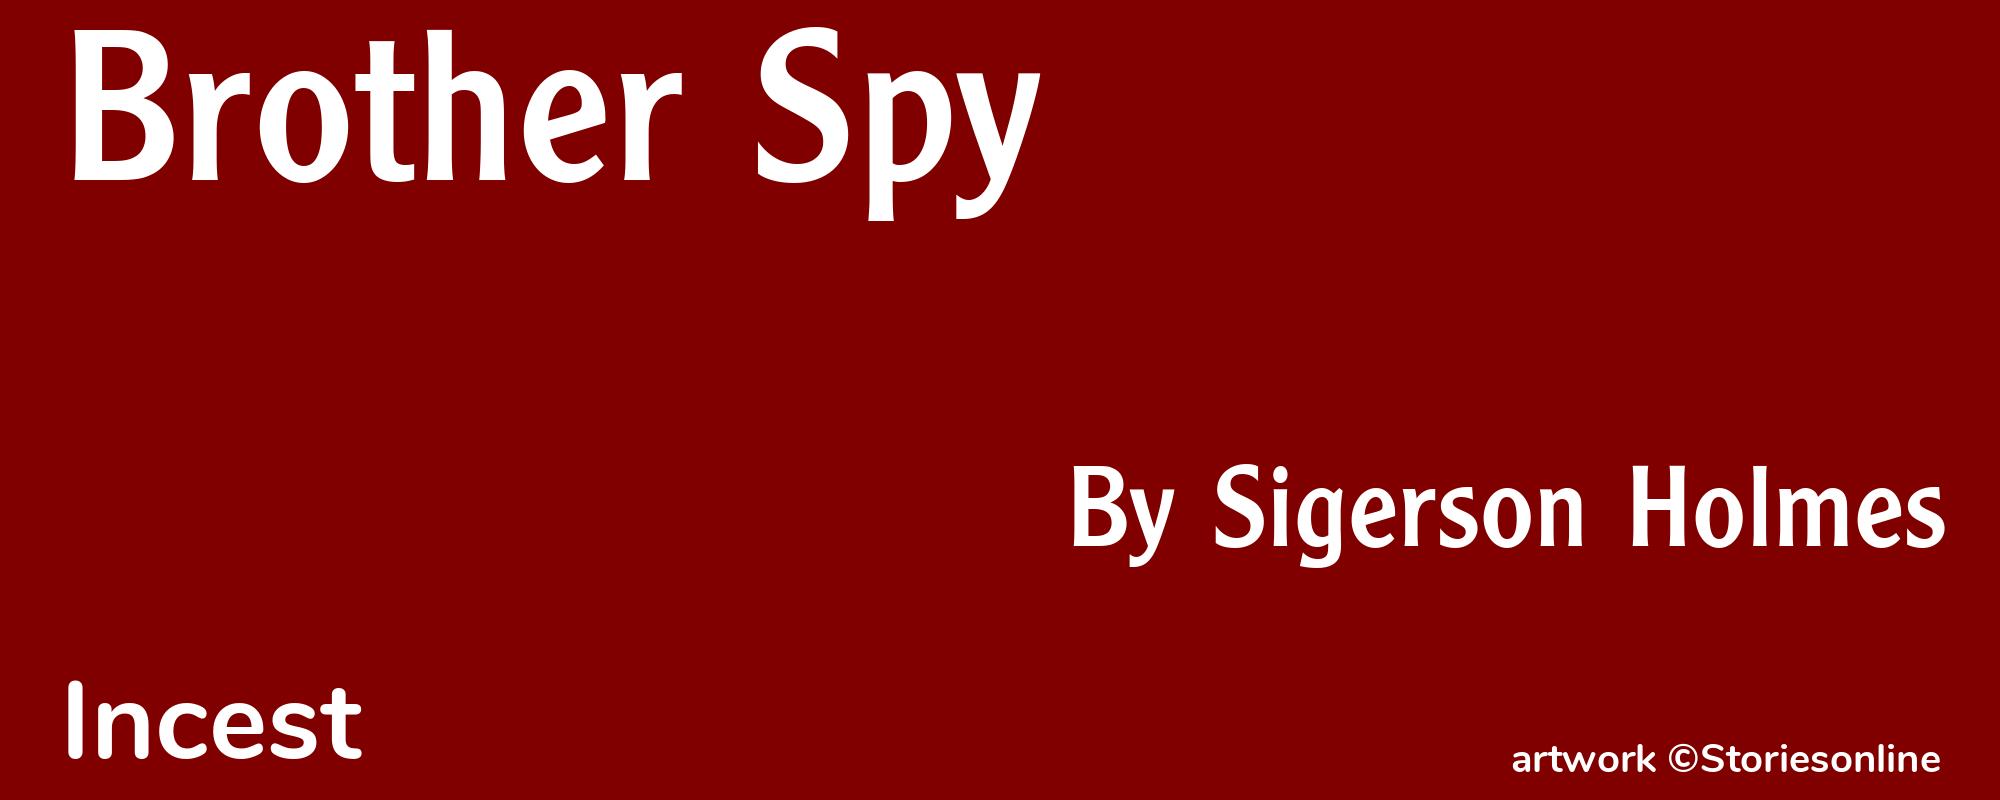 Brother Spy - Cover